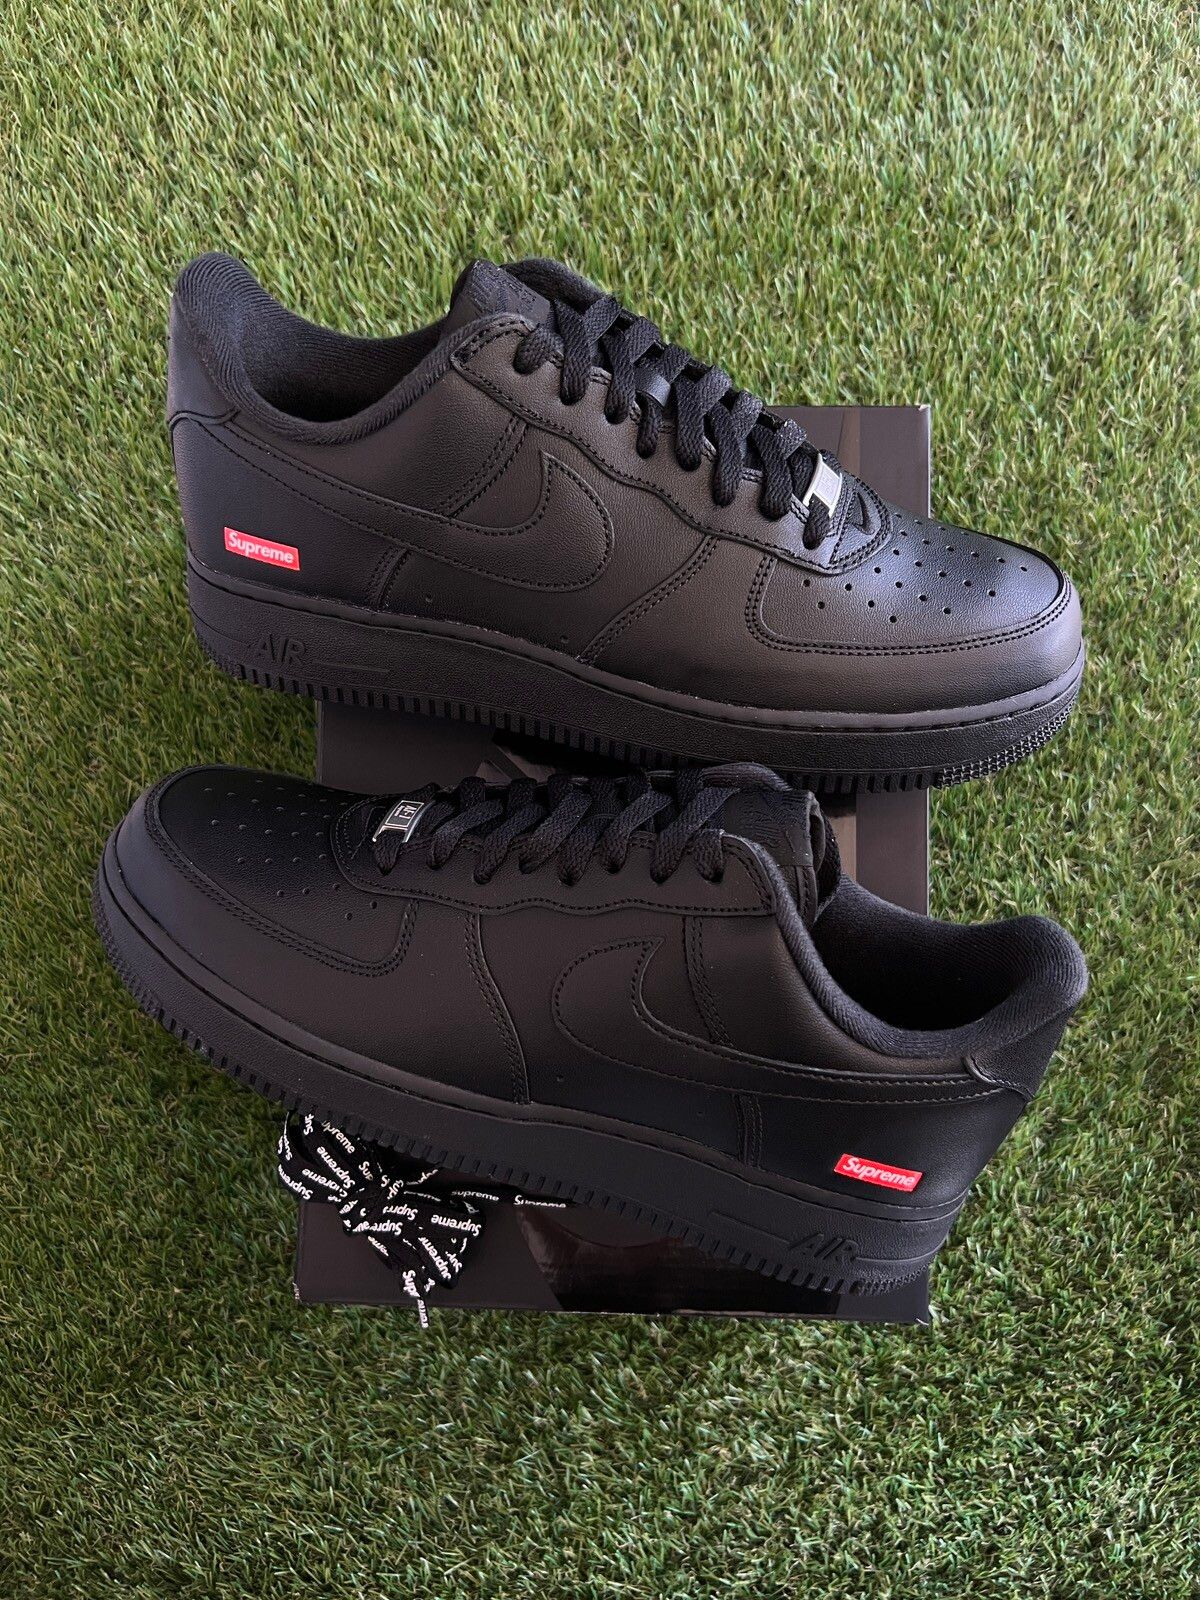 Pre-owned Nike X Supreme Nike Air Force 1 ‘black' Size 11.5 Shoes